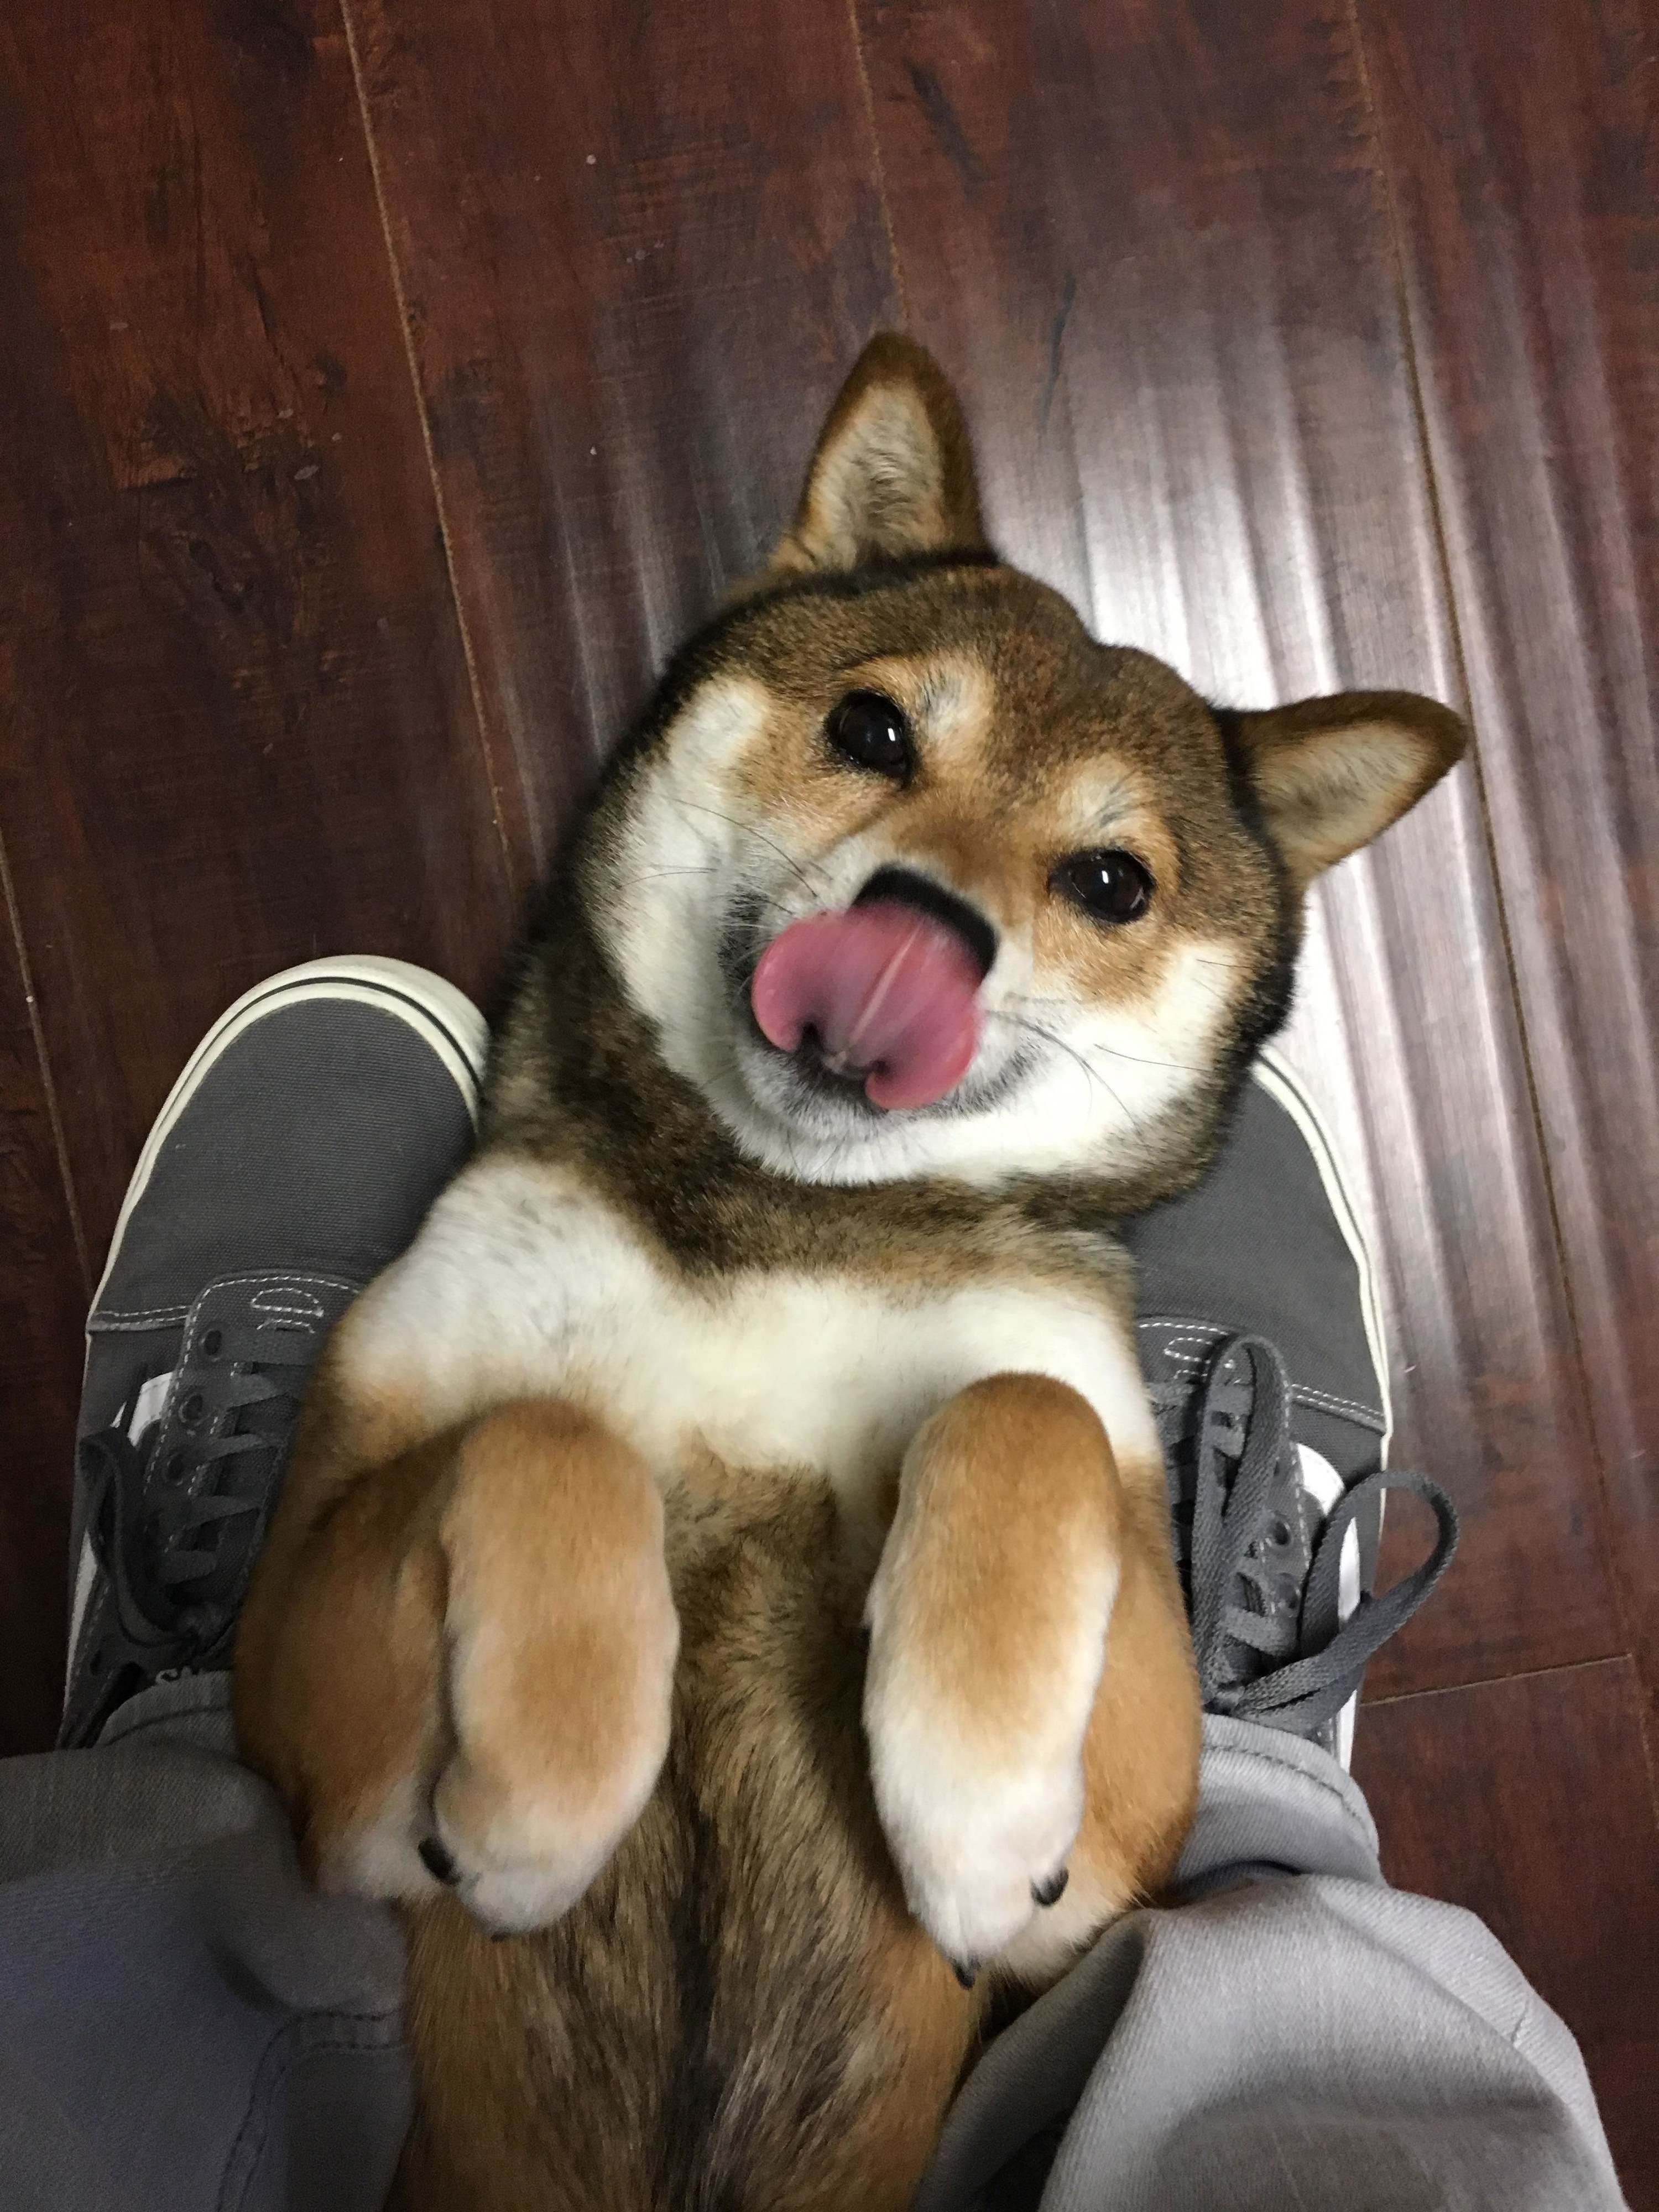 18 Shiba Inu Pictures That Prove They're Both Weird And Wonderful